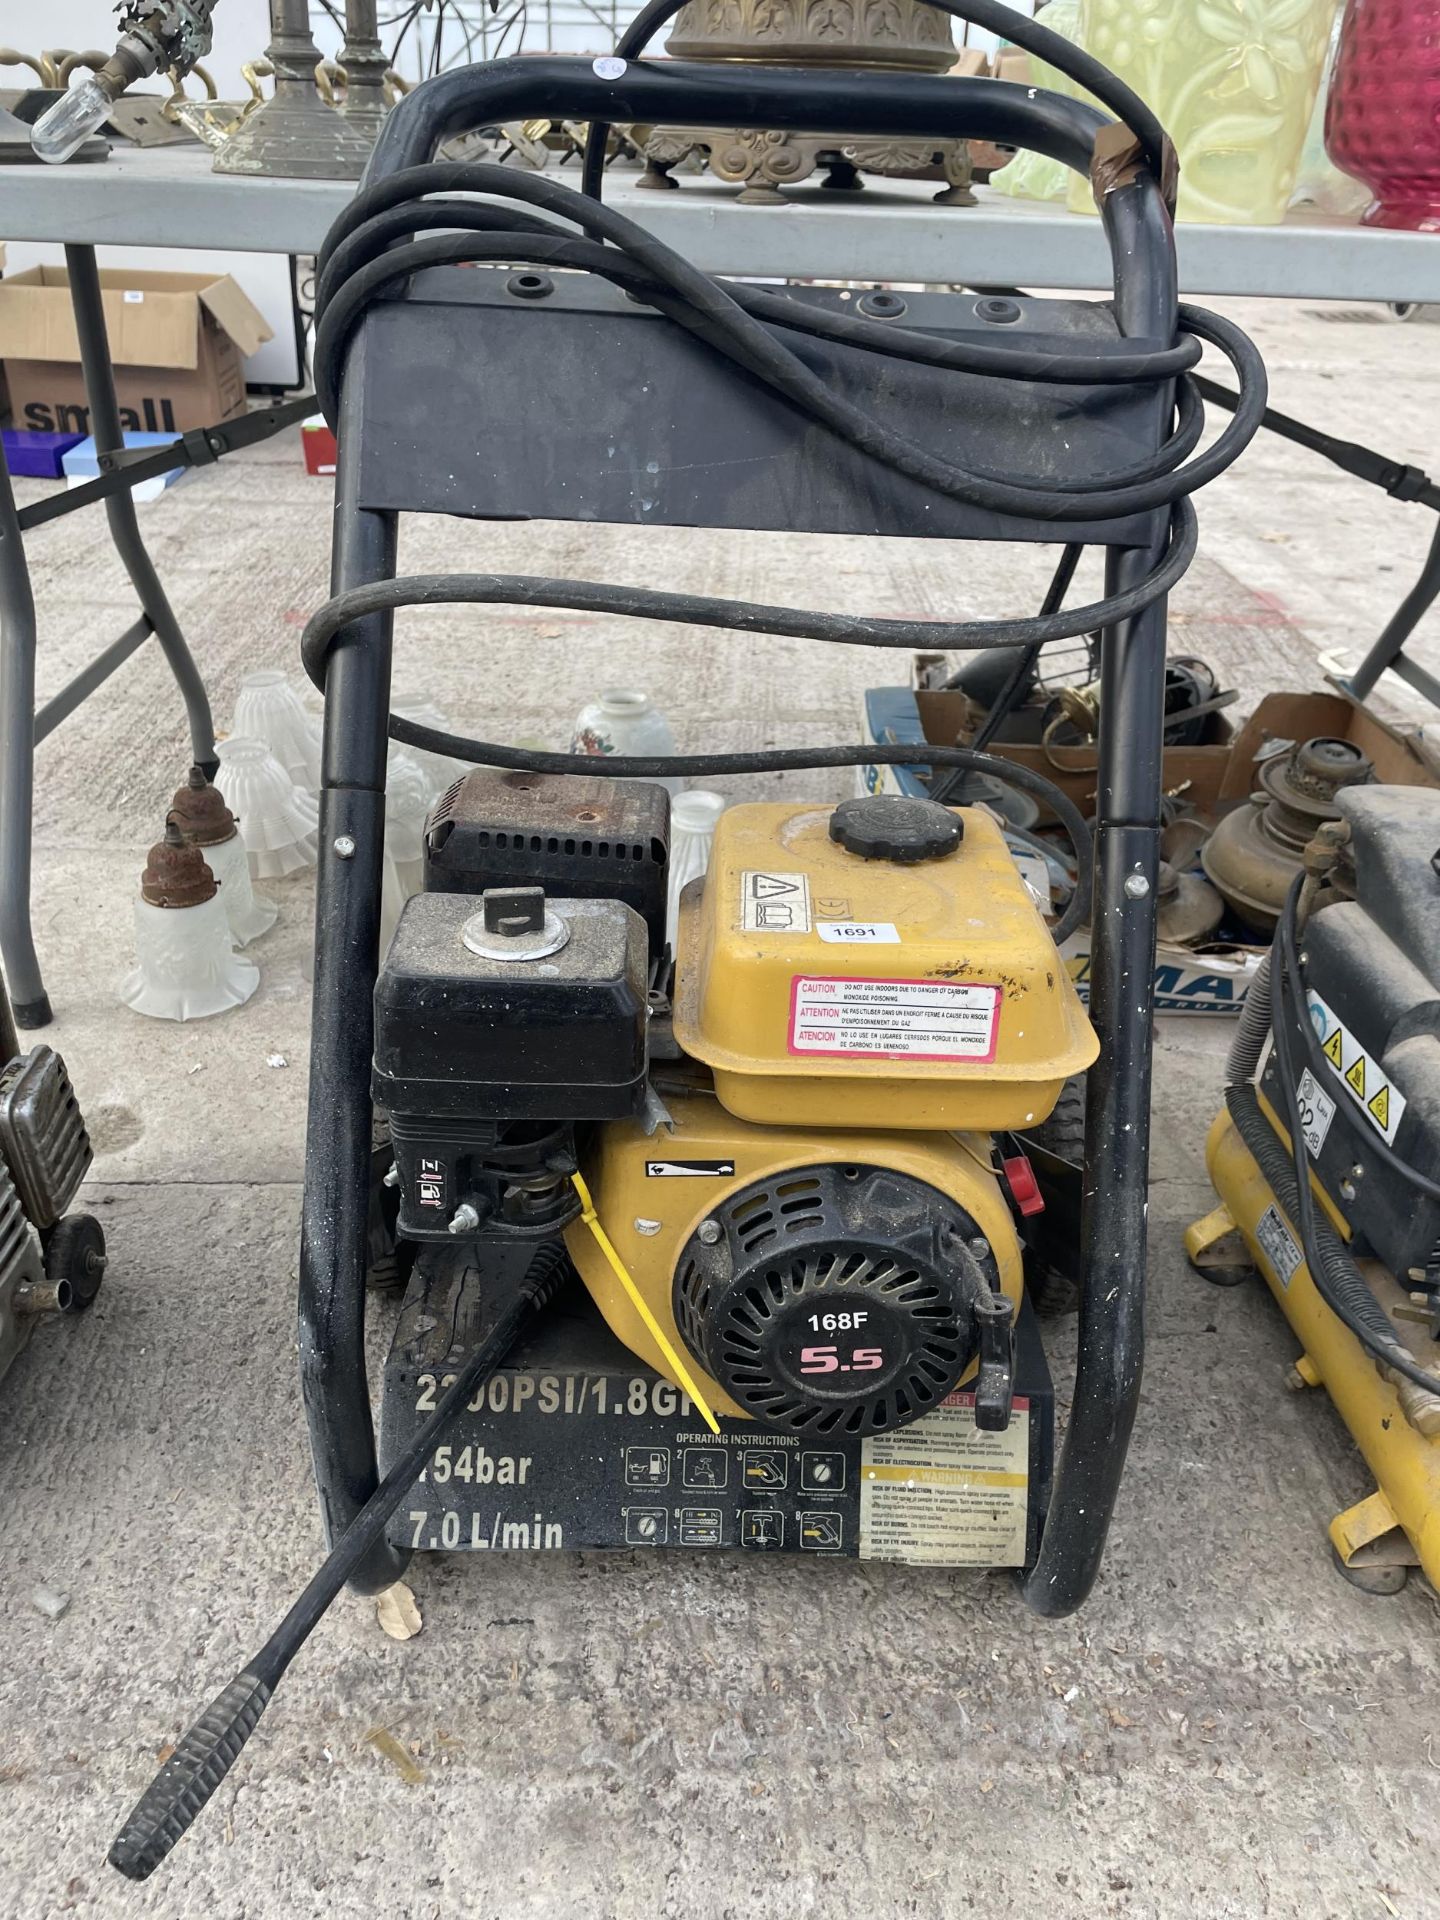 A PETROL 5.5HP PRESSURE WASHER - Image 2 of 3